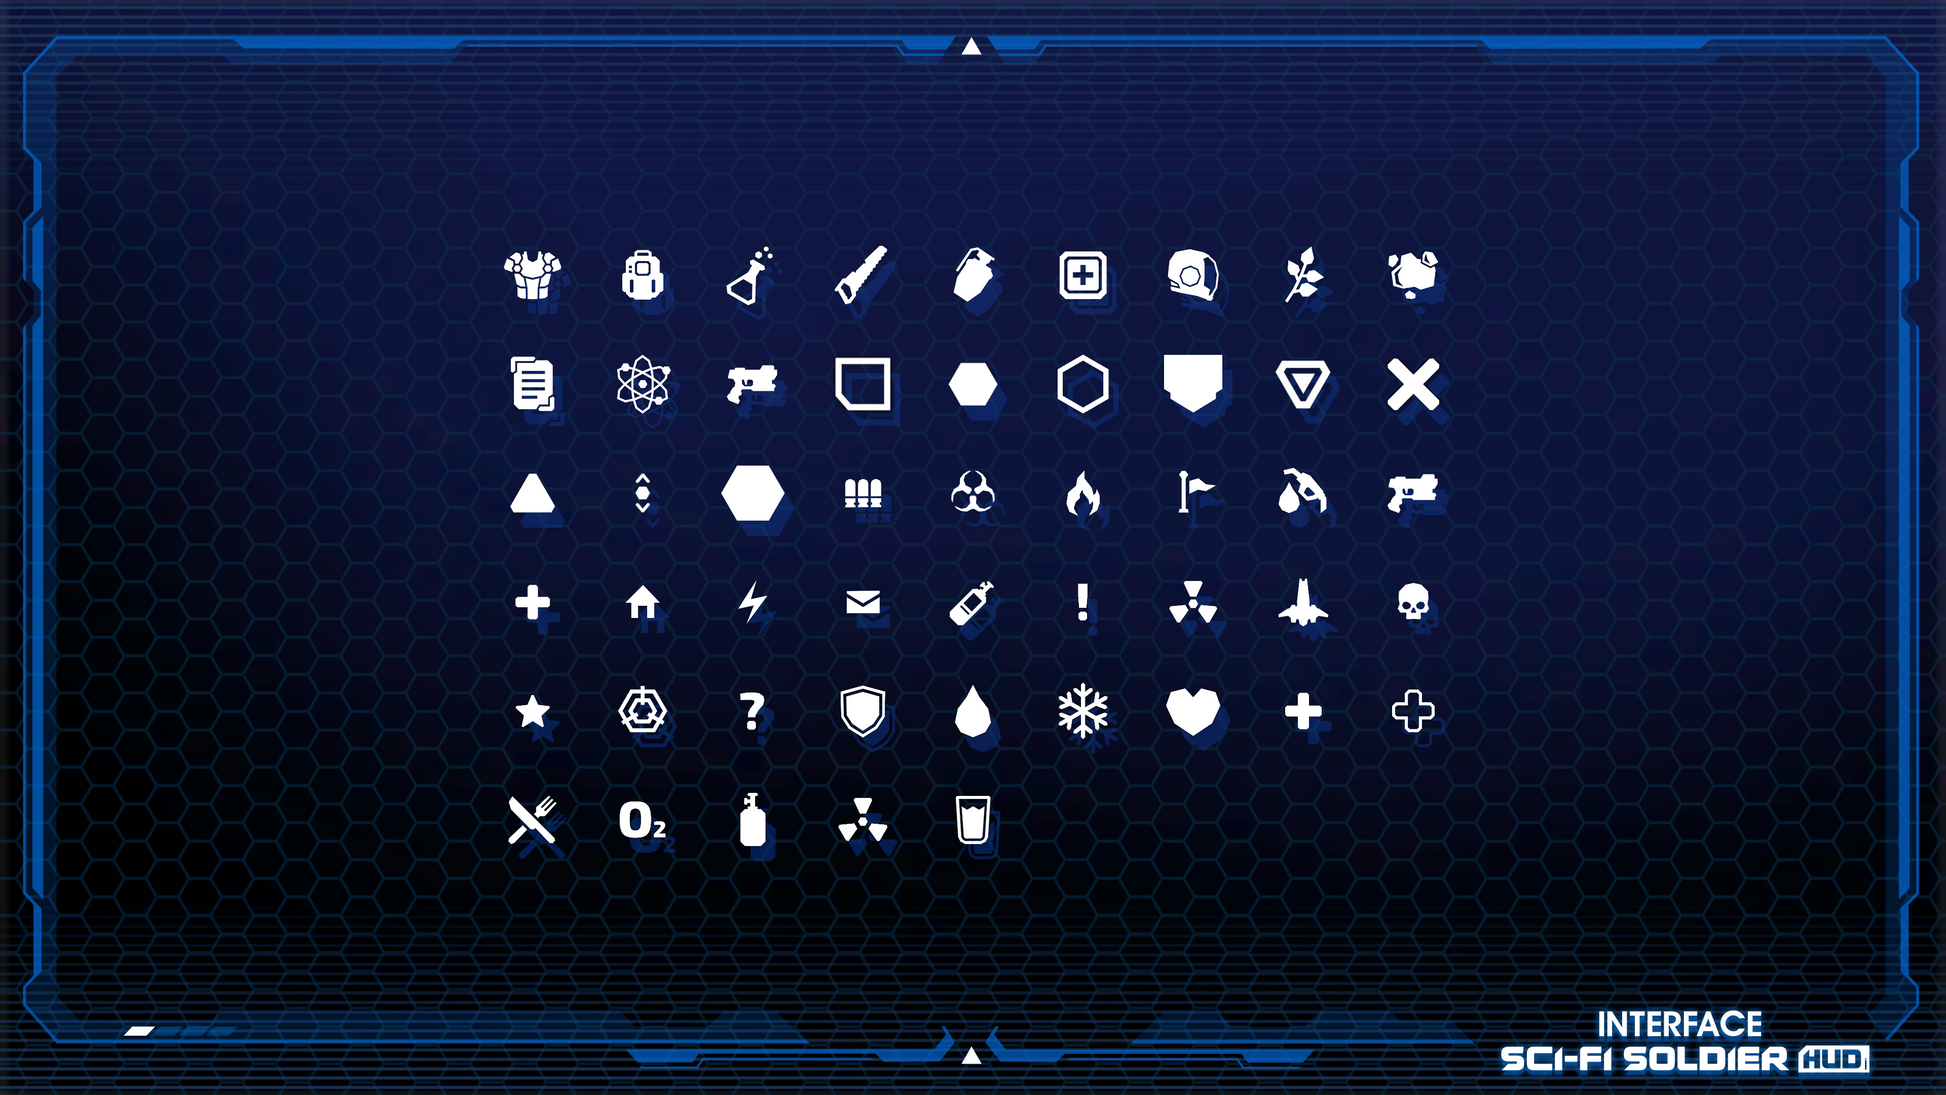 Menu indicator sprites from the INTERFACE Sci-Fi Soldier HUD asset pack